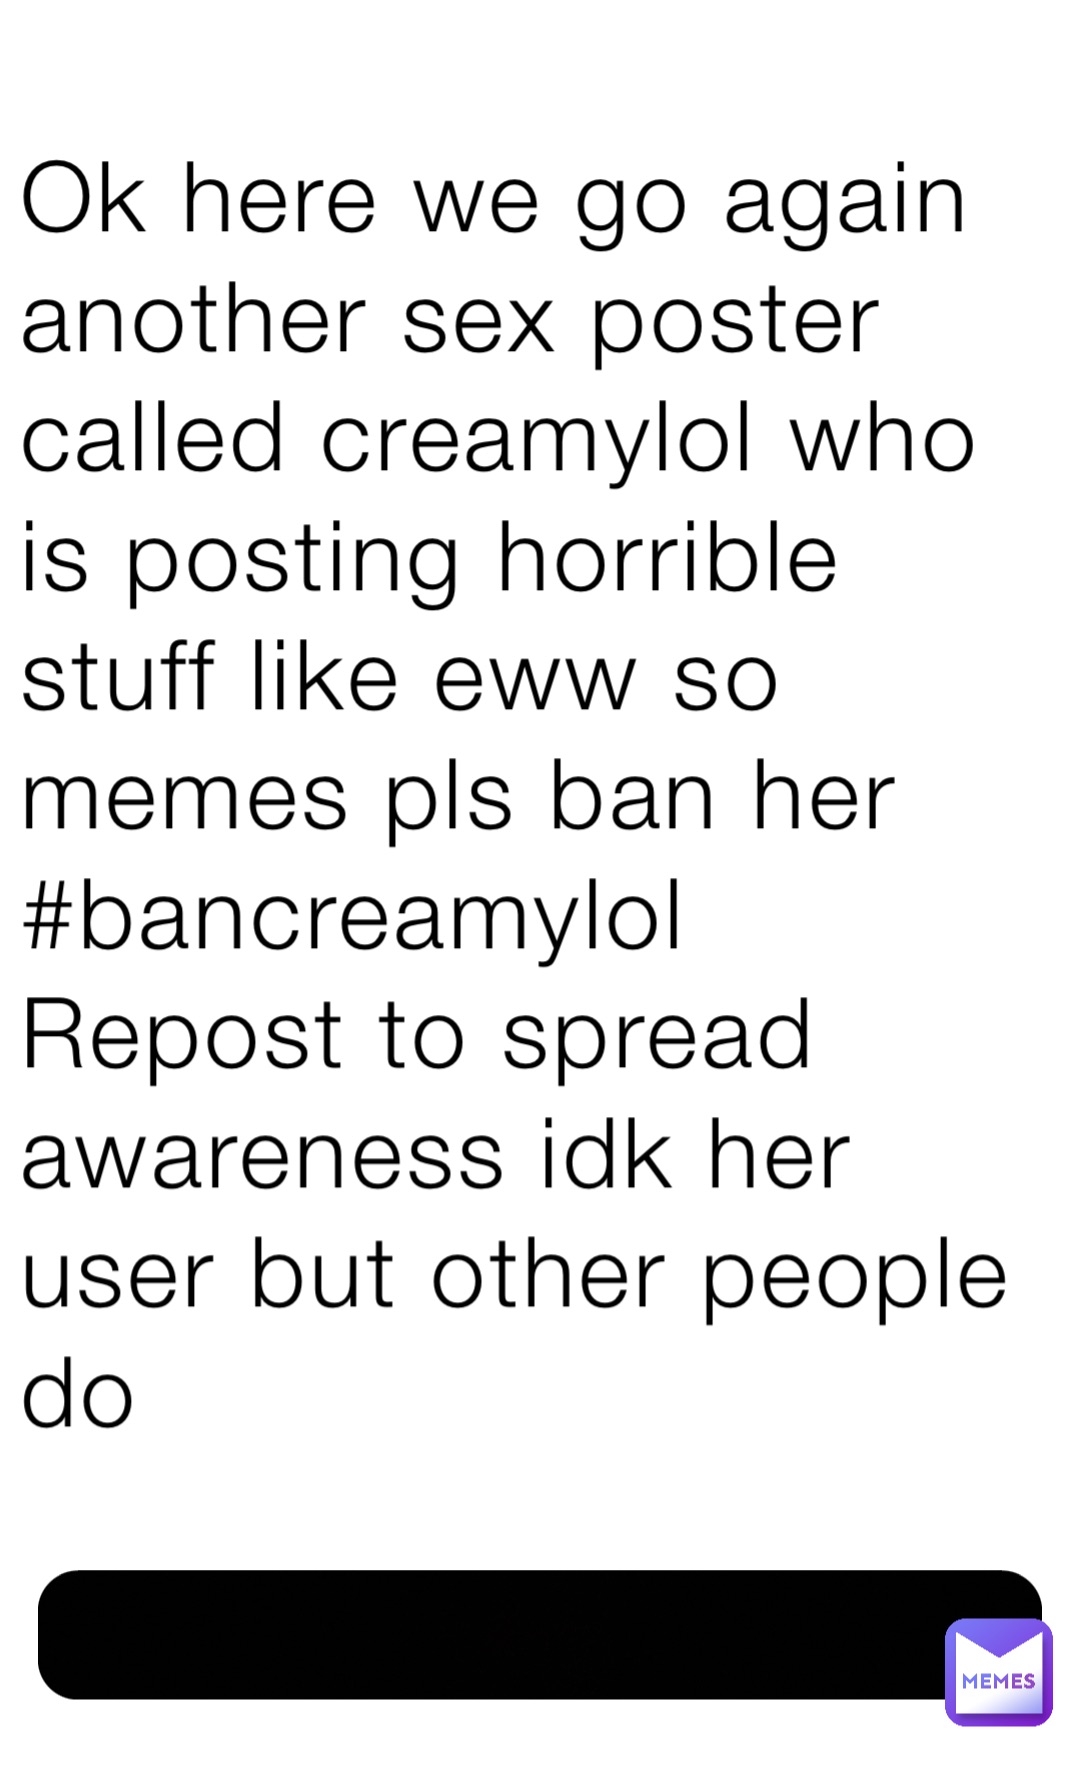 Ok here we go again another sex poster called creamylol who is posting horrible stuff like eww so memes pls ban her
#bancreamylol
Repost to spread awareness idk her user but other people do